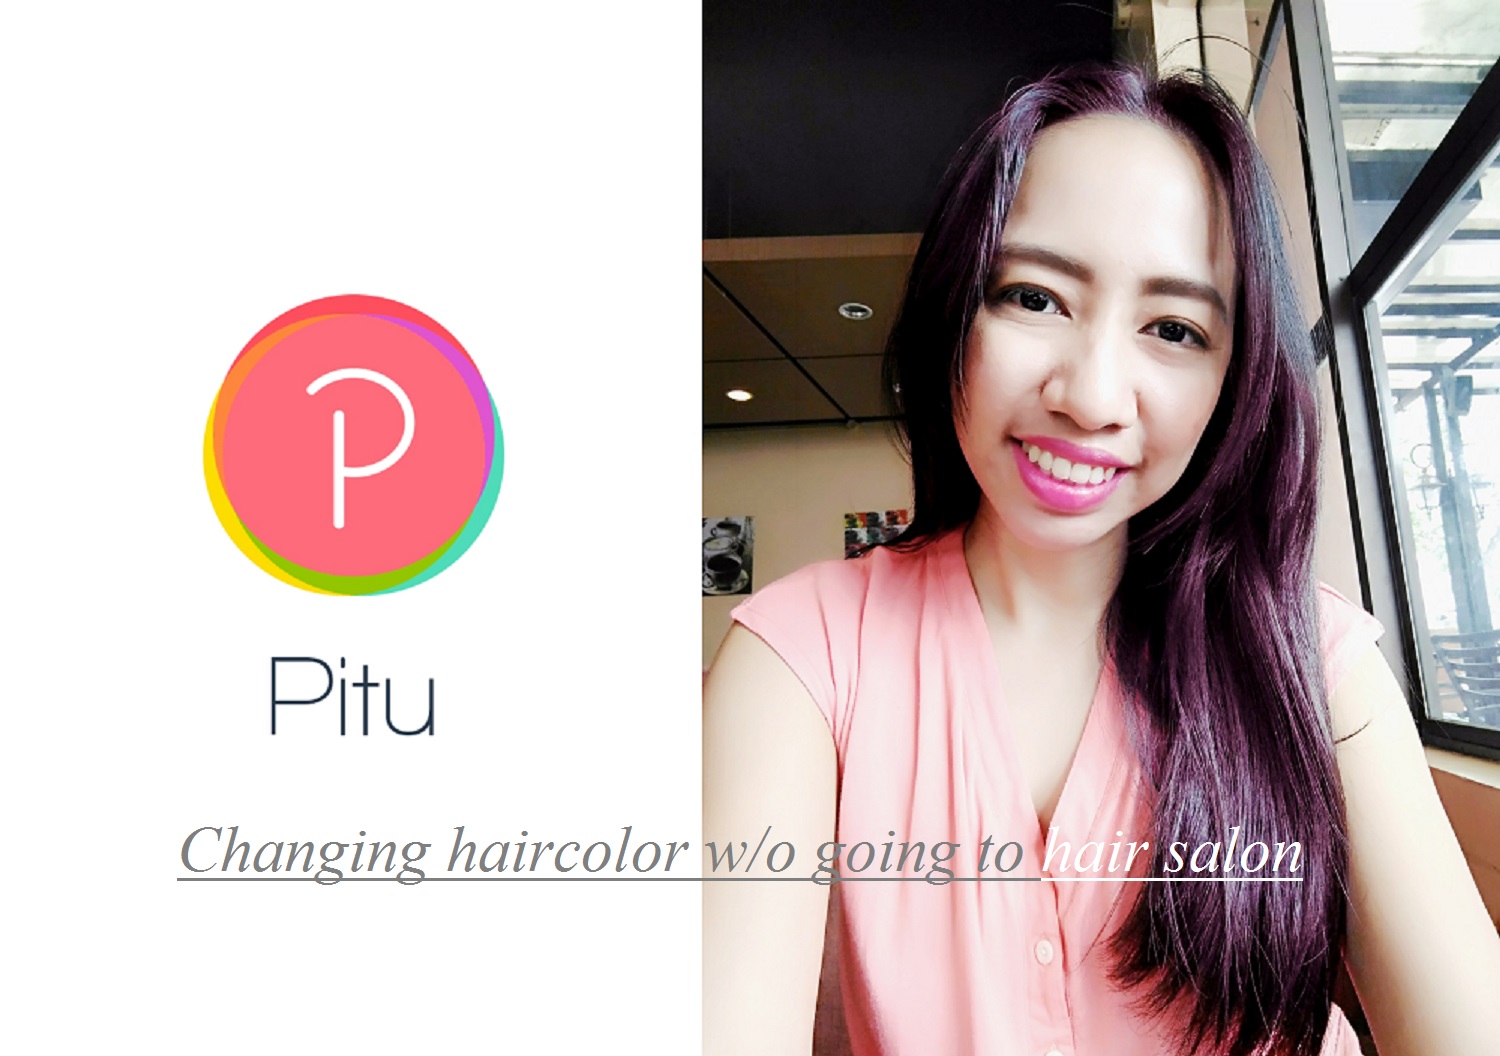 Pitu Makeover-Editing App - For Urban Women - Awarded Top 100 Urban Blog /  Fashion, Lifestyle and Travel